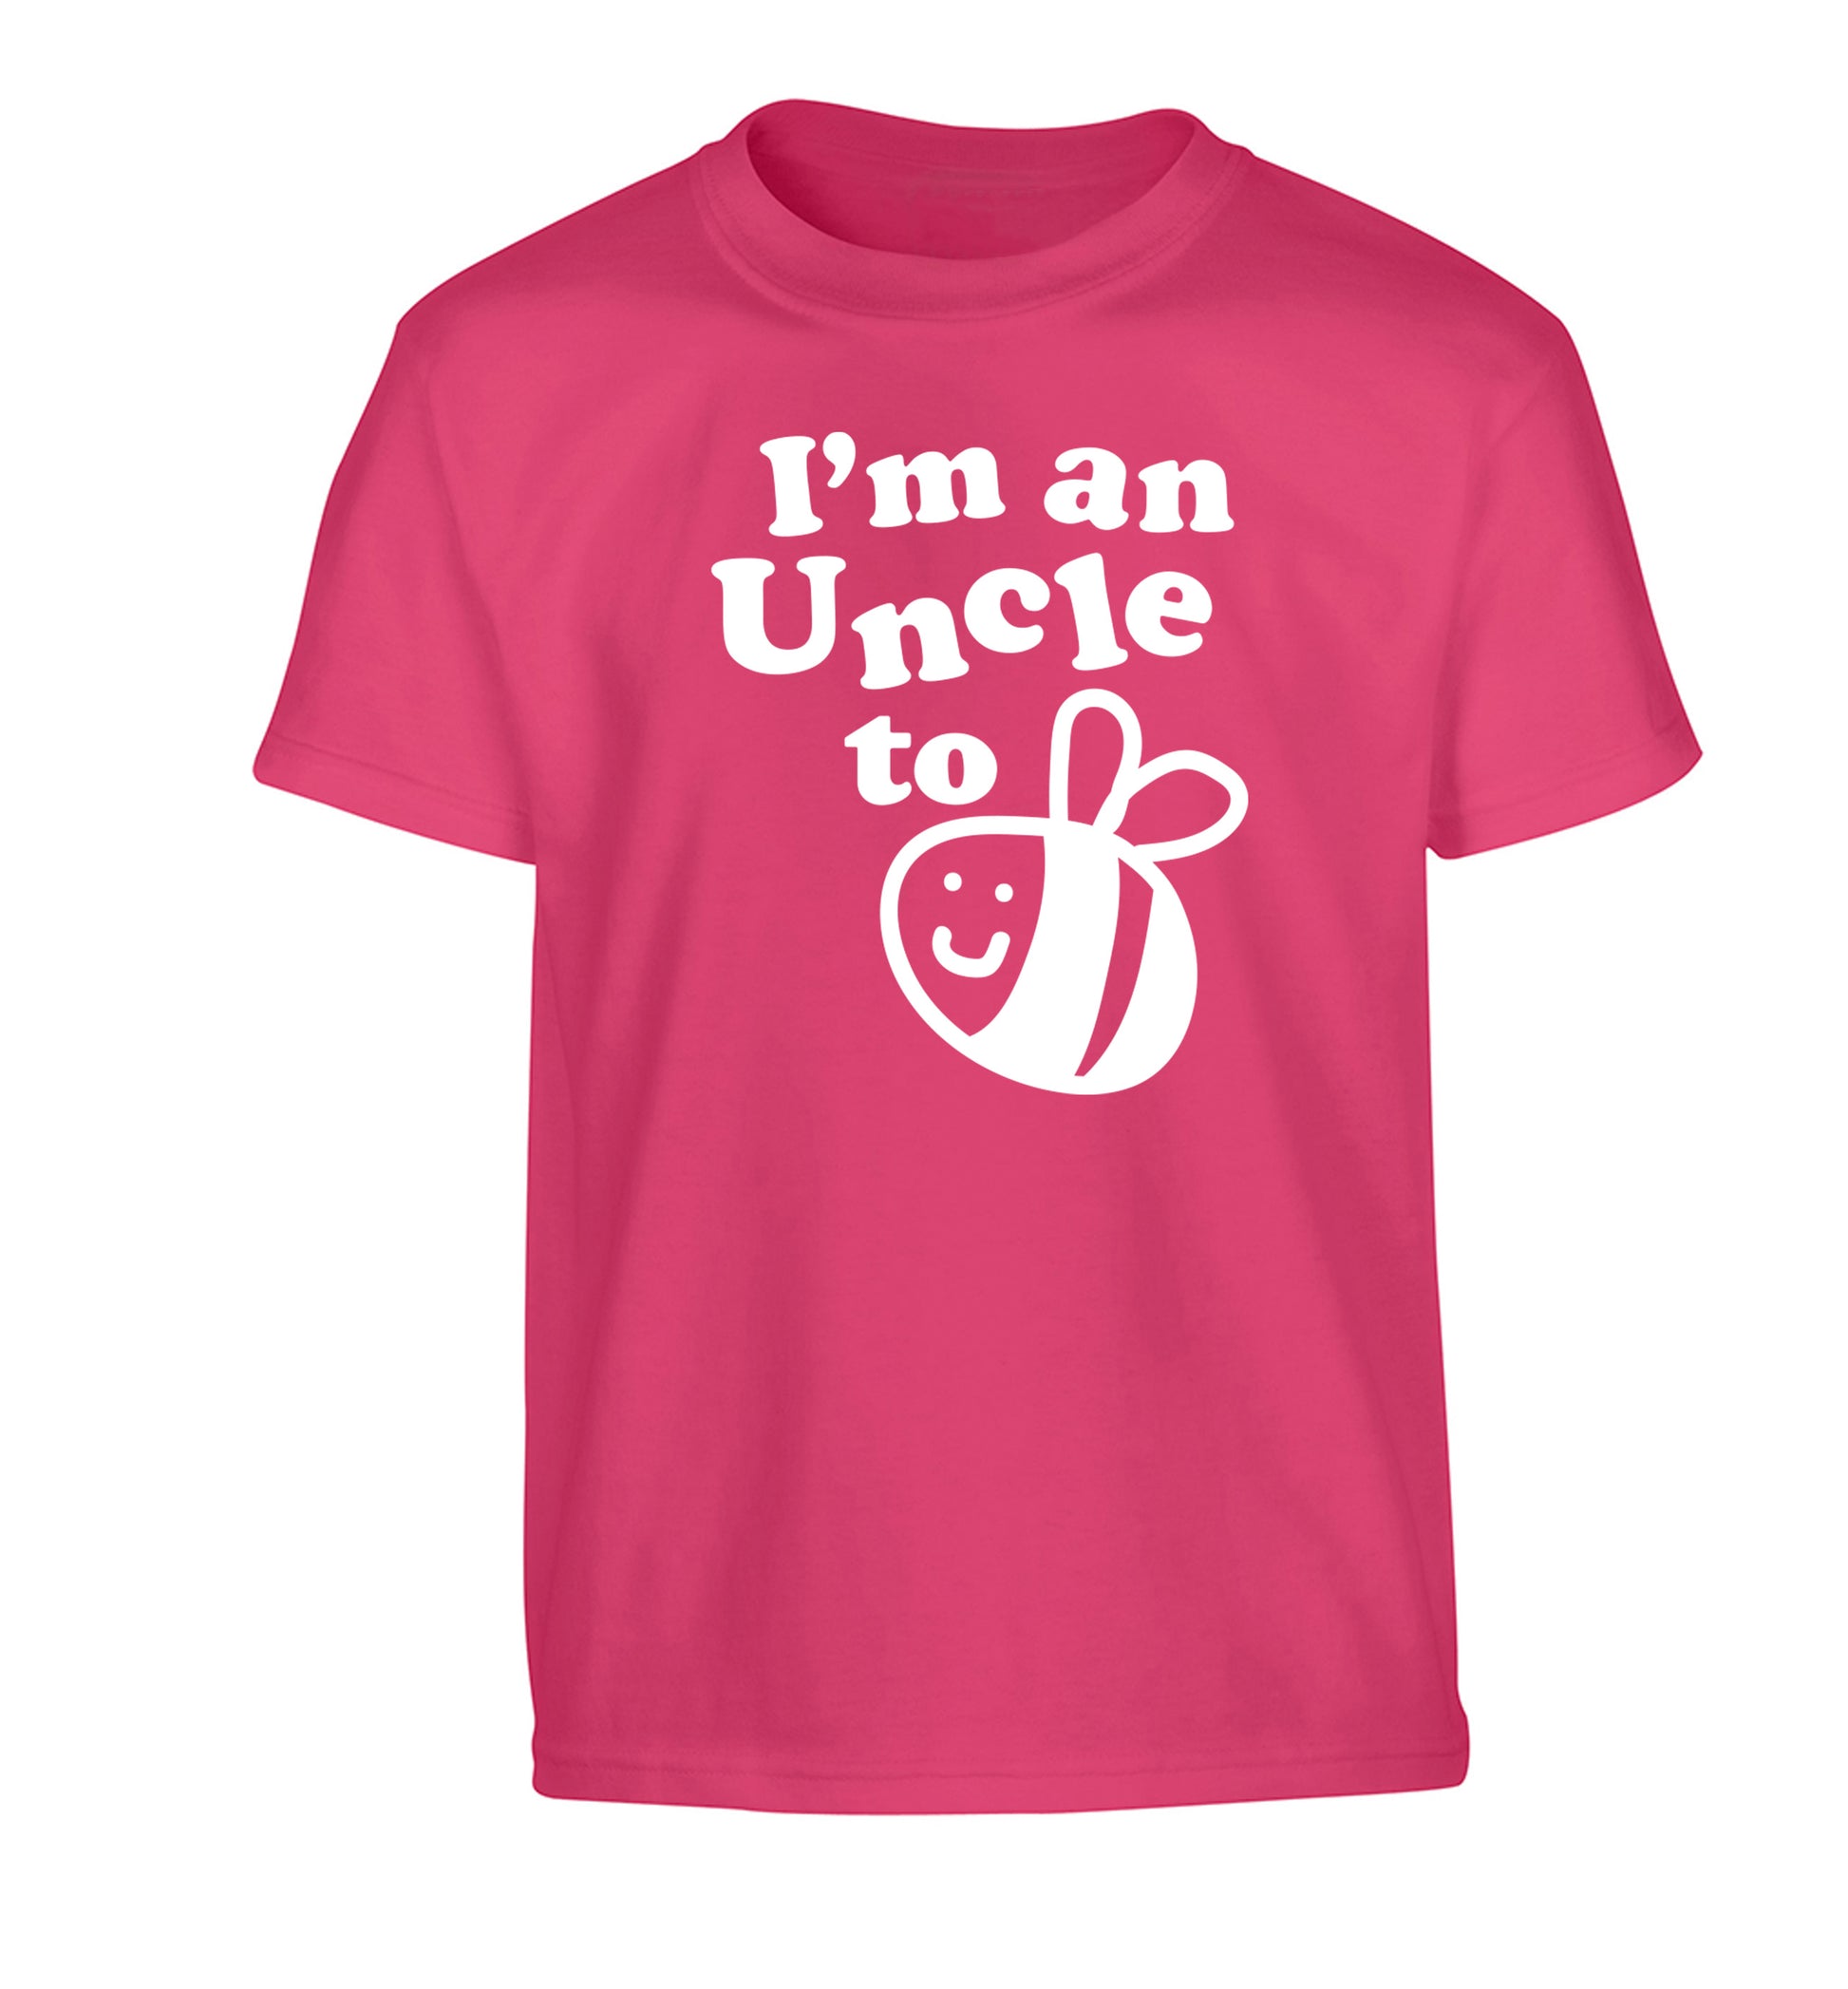 I'm an uncle to be Children's pink Tshirt 12-14 Years